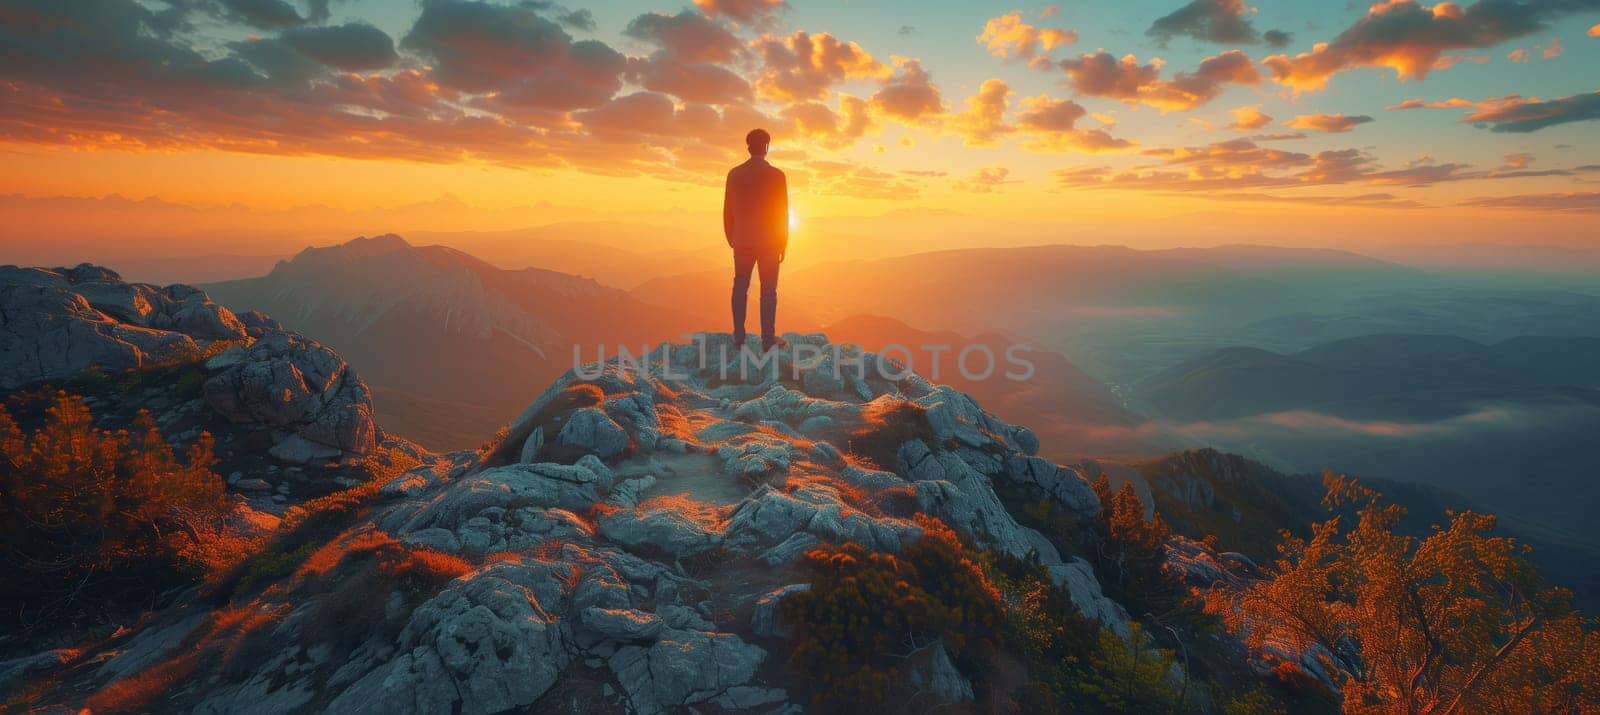 A man stands at the summit of a mountain, witnessing the sunset over a breathtaking natural landscape. The sky is painted with clouds as dusk approaches